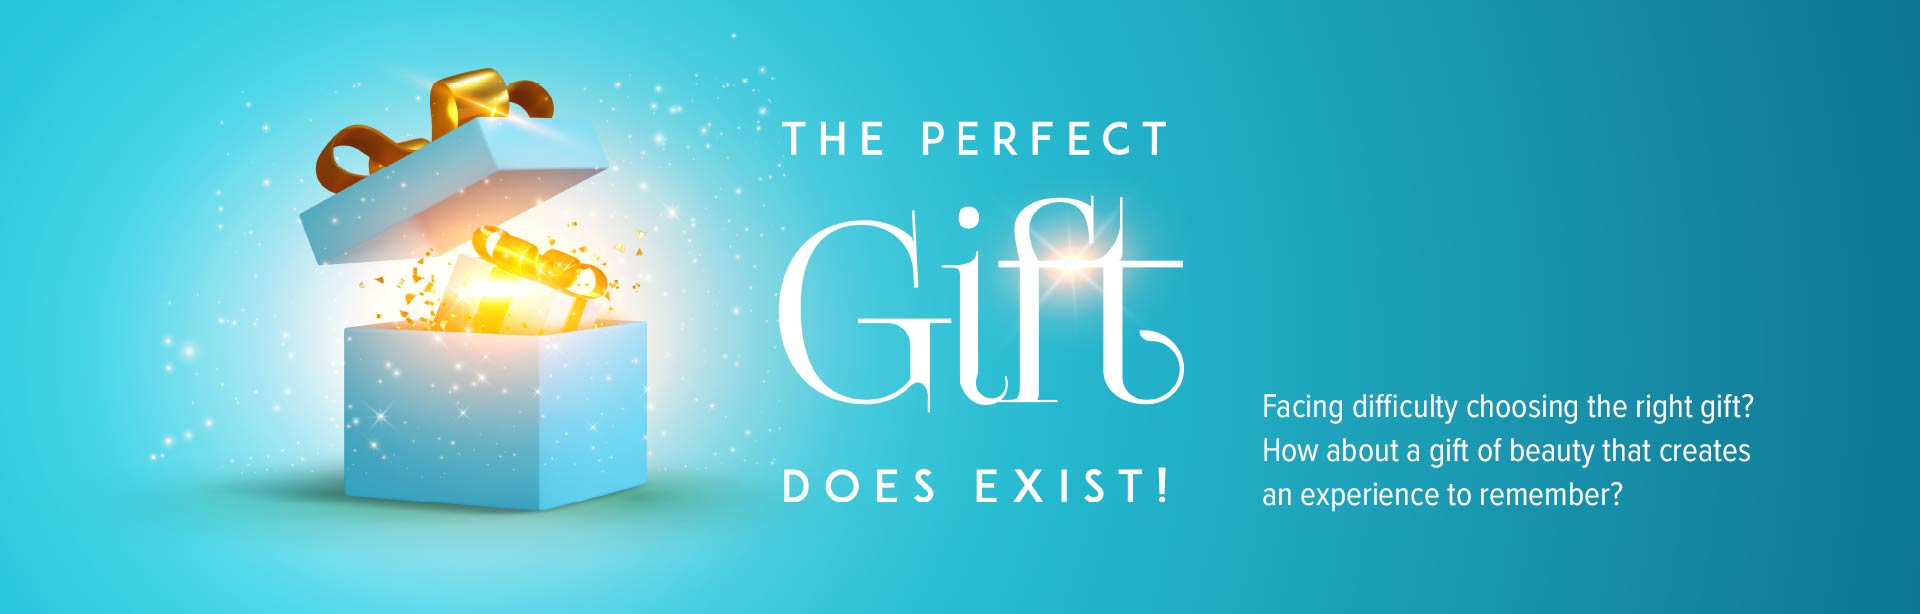 Salon gift vouchers: The perfect gift.